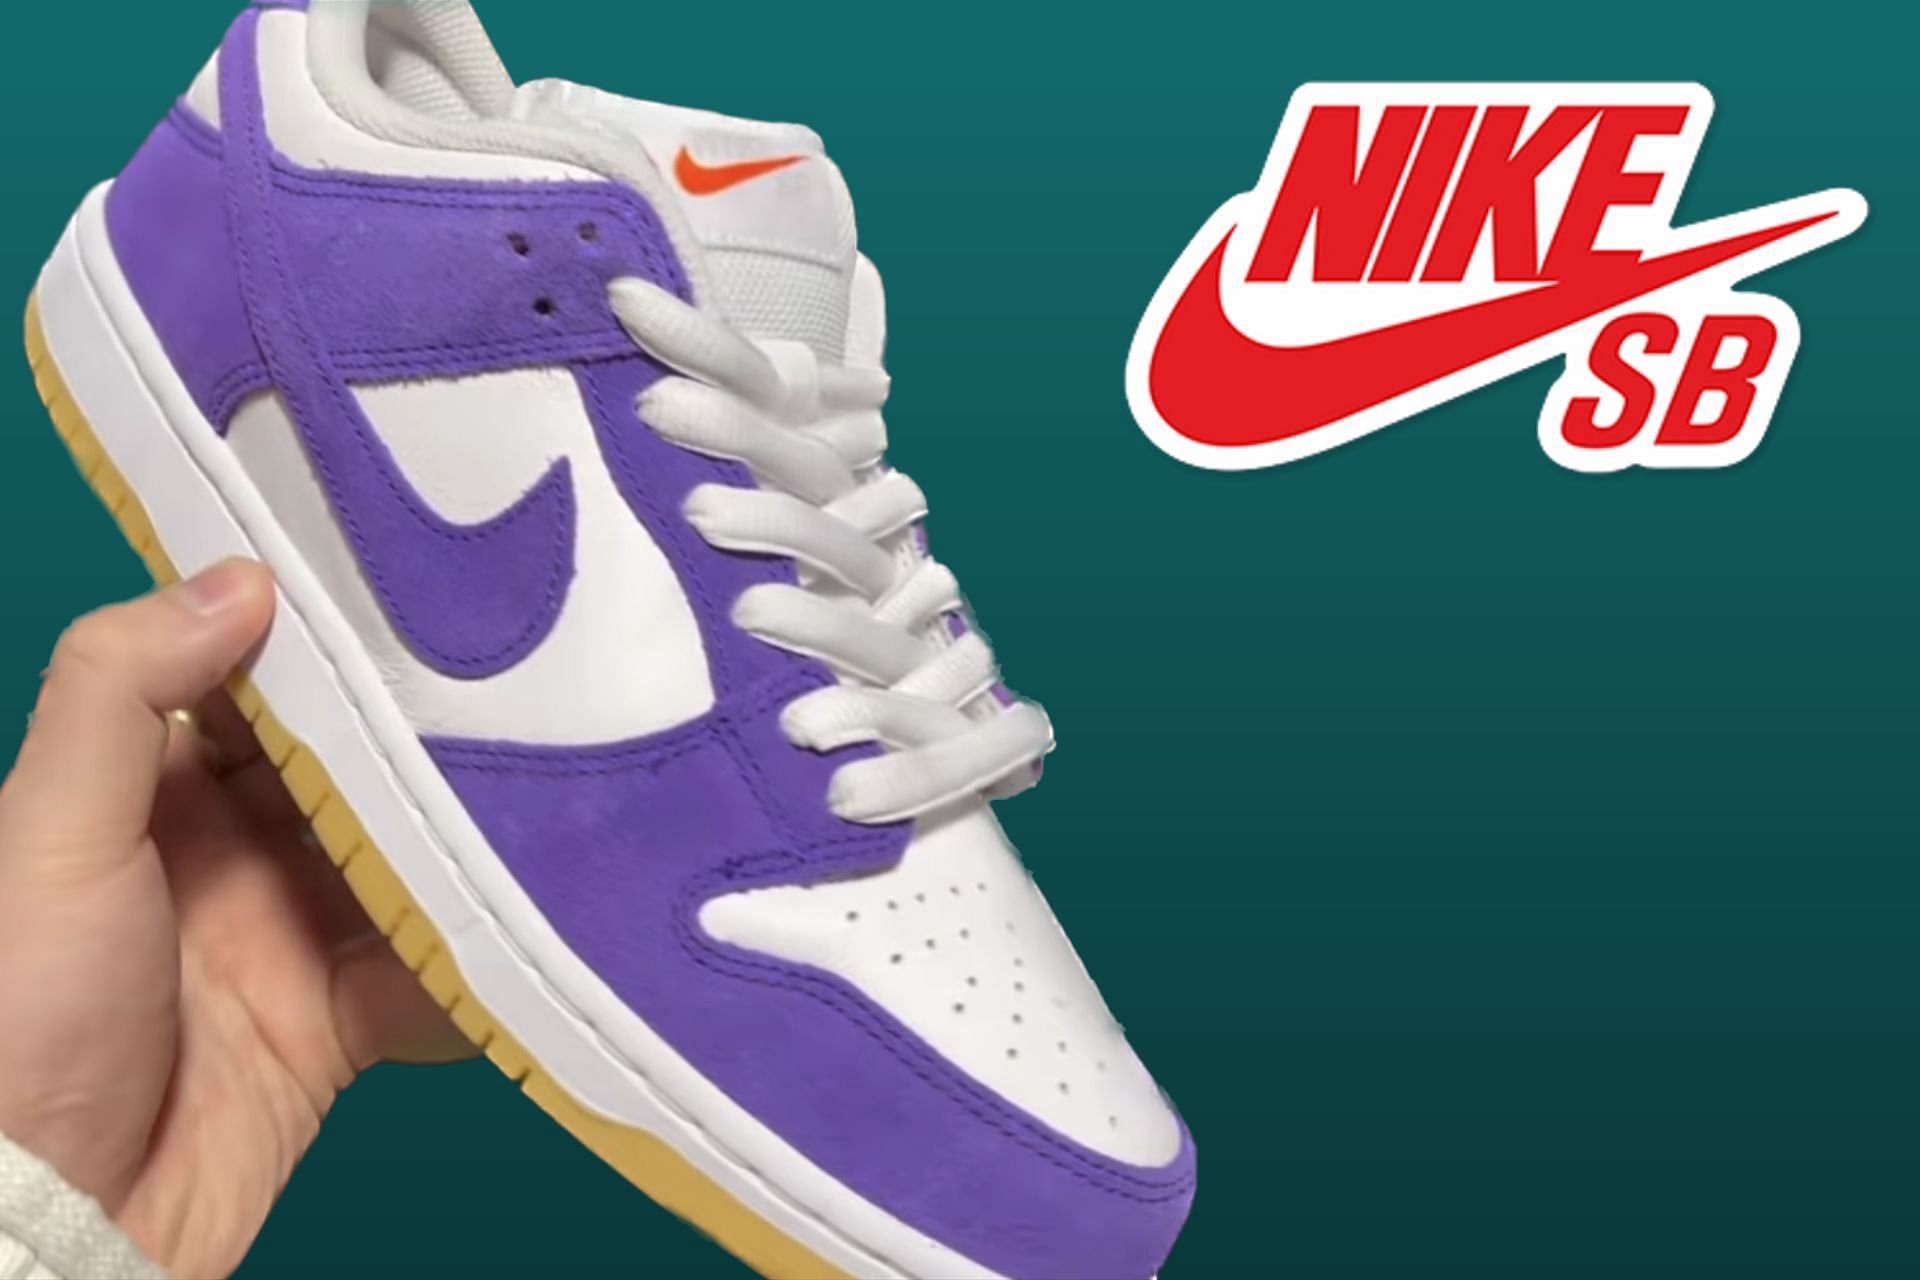 SB Dunk Low “Court Purple Gum” Where to buy, price, and more details explored